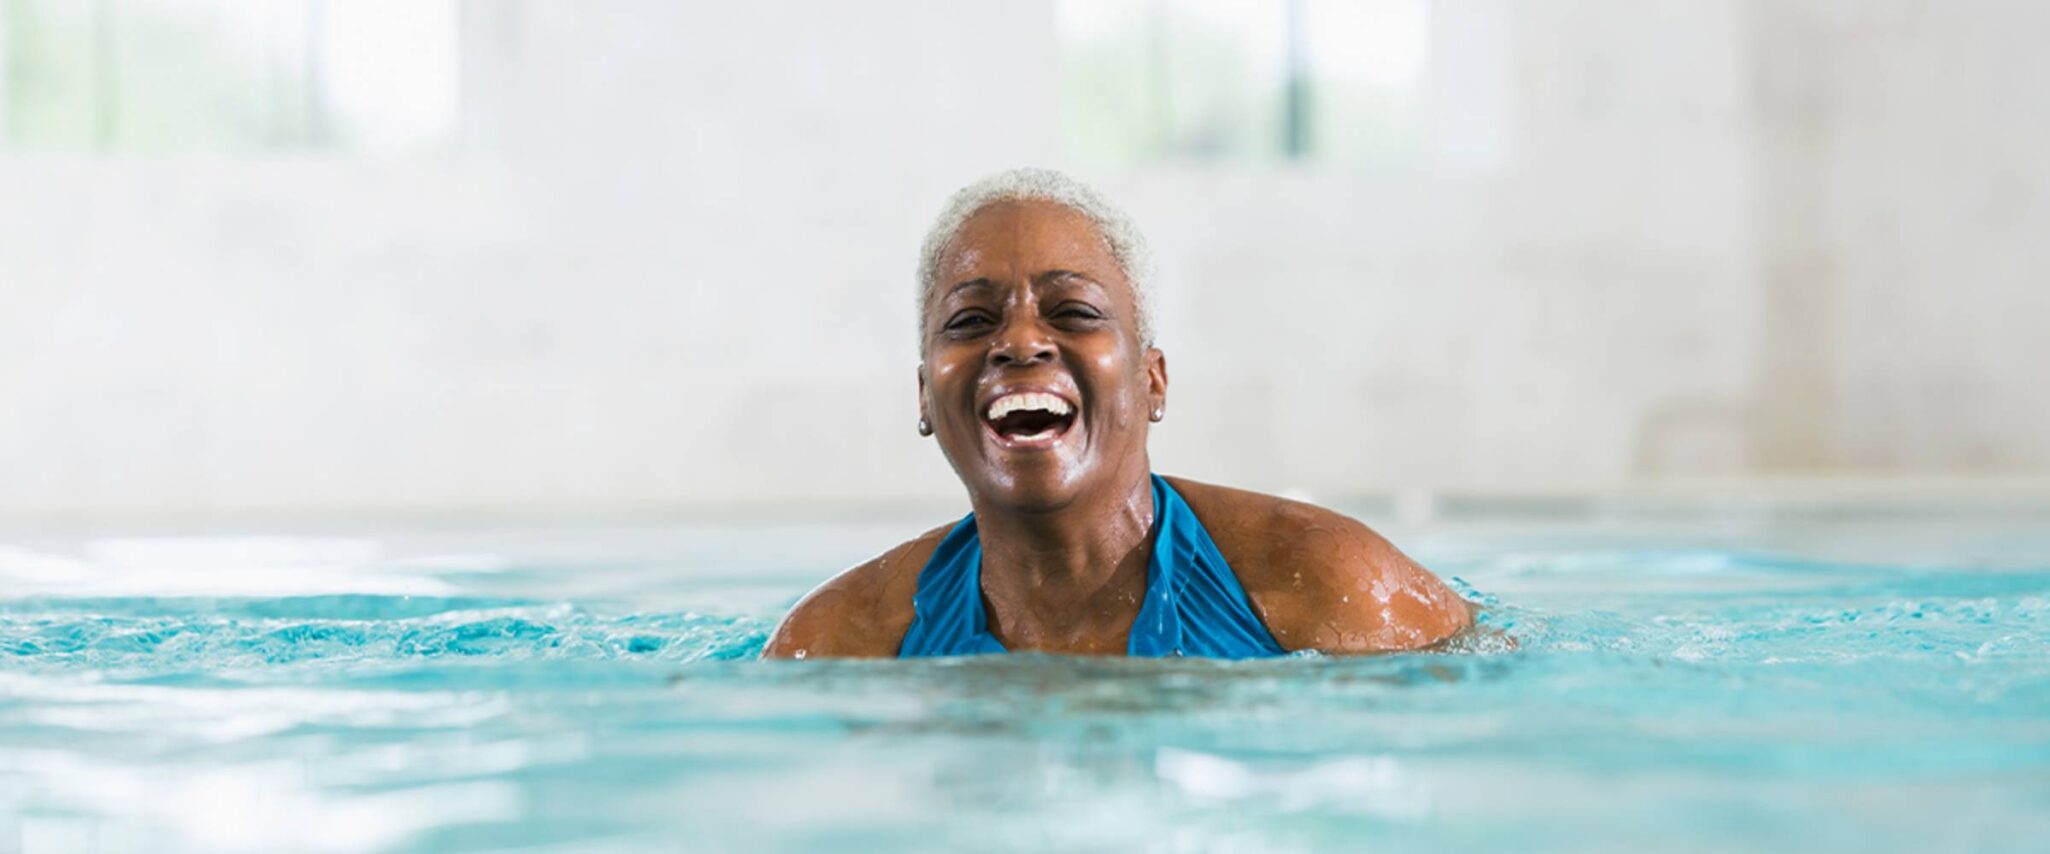 A senior woman smiles while swimming in a salt water pool